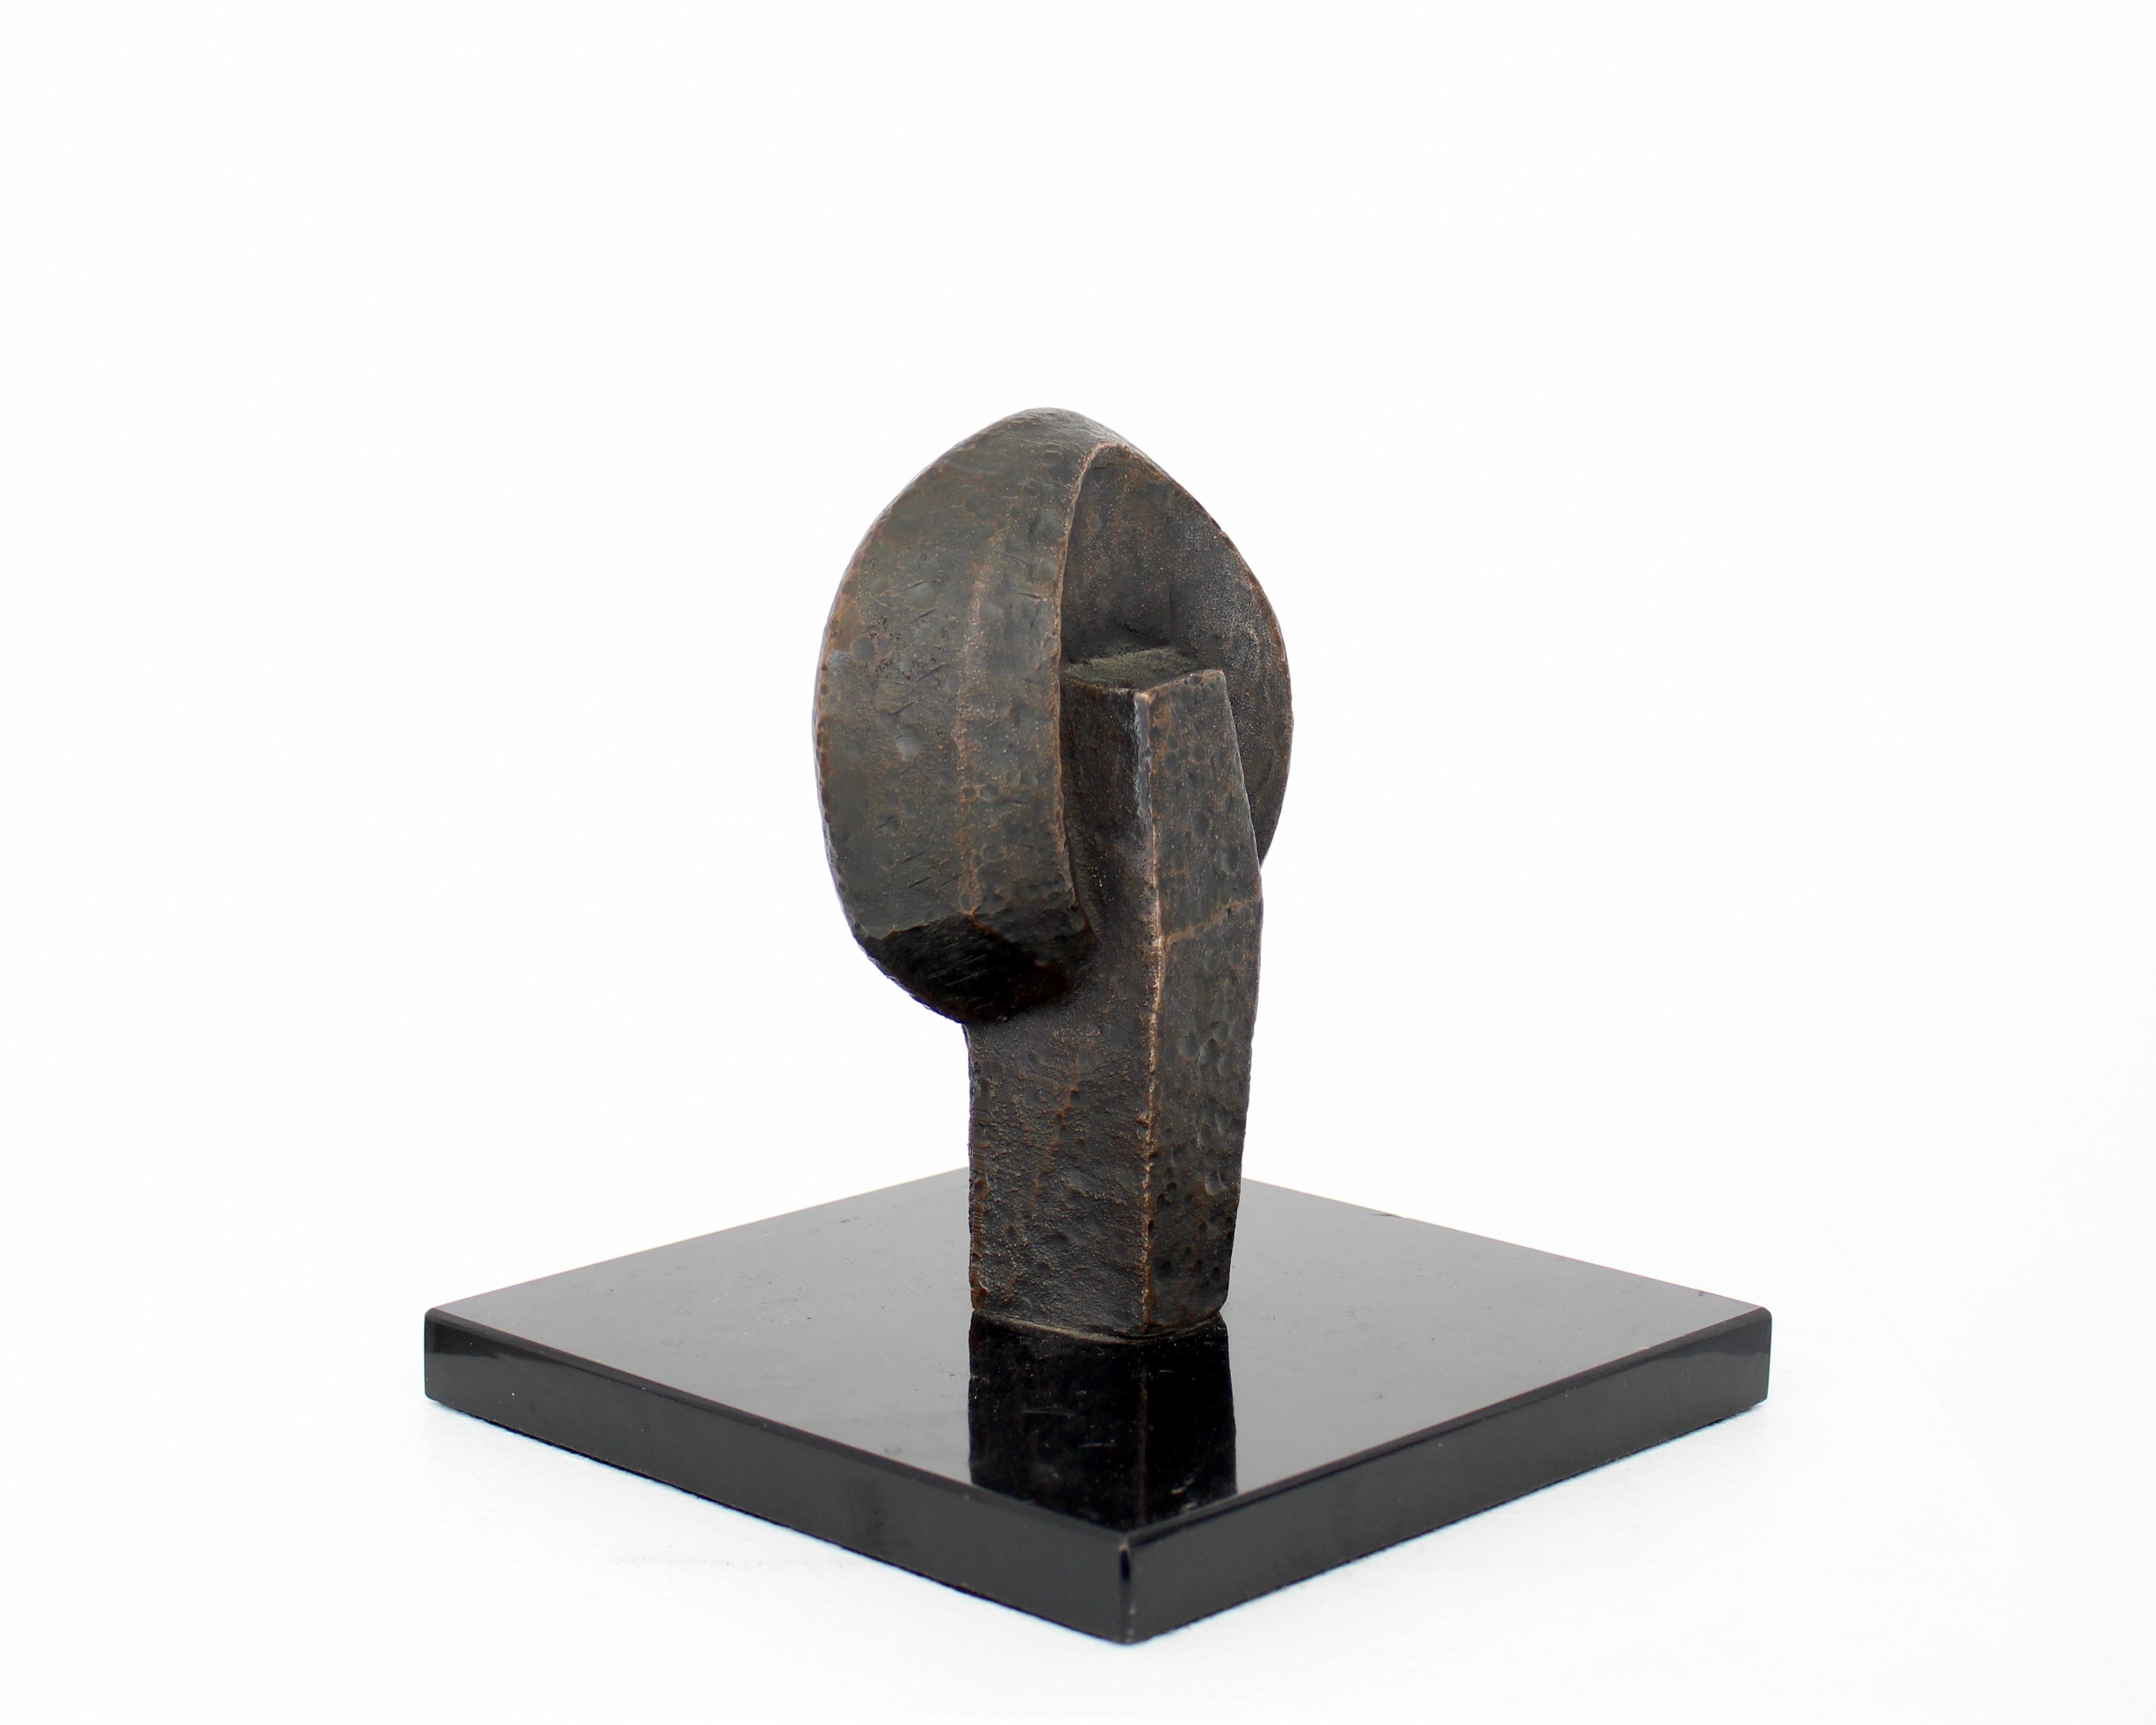 Bronze abstract sculpture sitting on a square marble plinth.
William Conrad Severson, 1924 - 1999. Born in Madison Wisconsin, he graduated from the University of Wisconsin at Madsion. 
He began his career in the late 1950's as a sculptor for